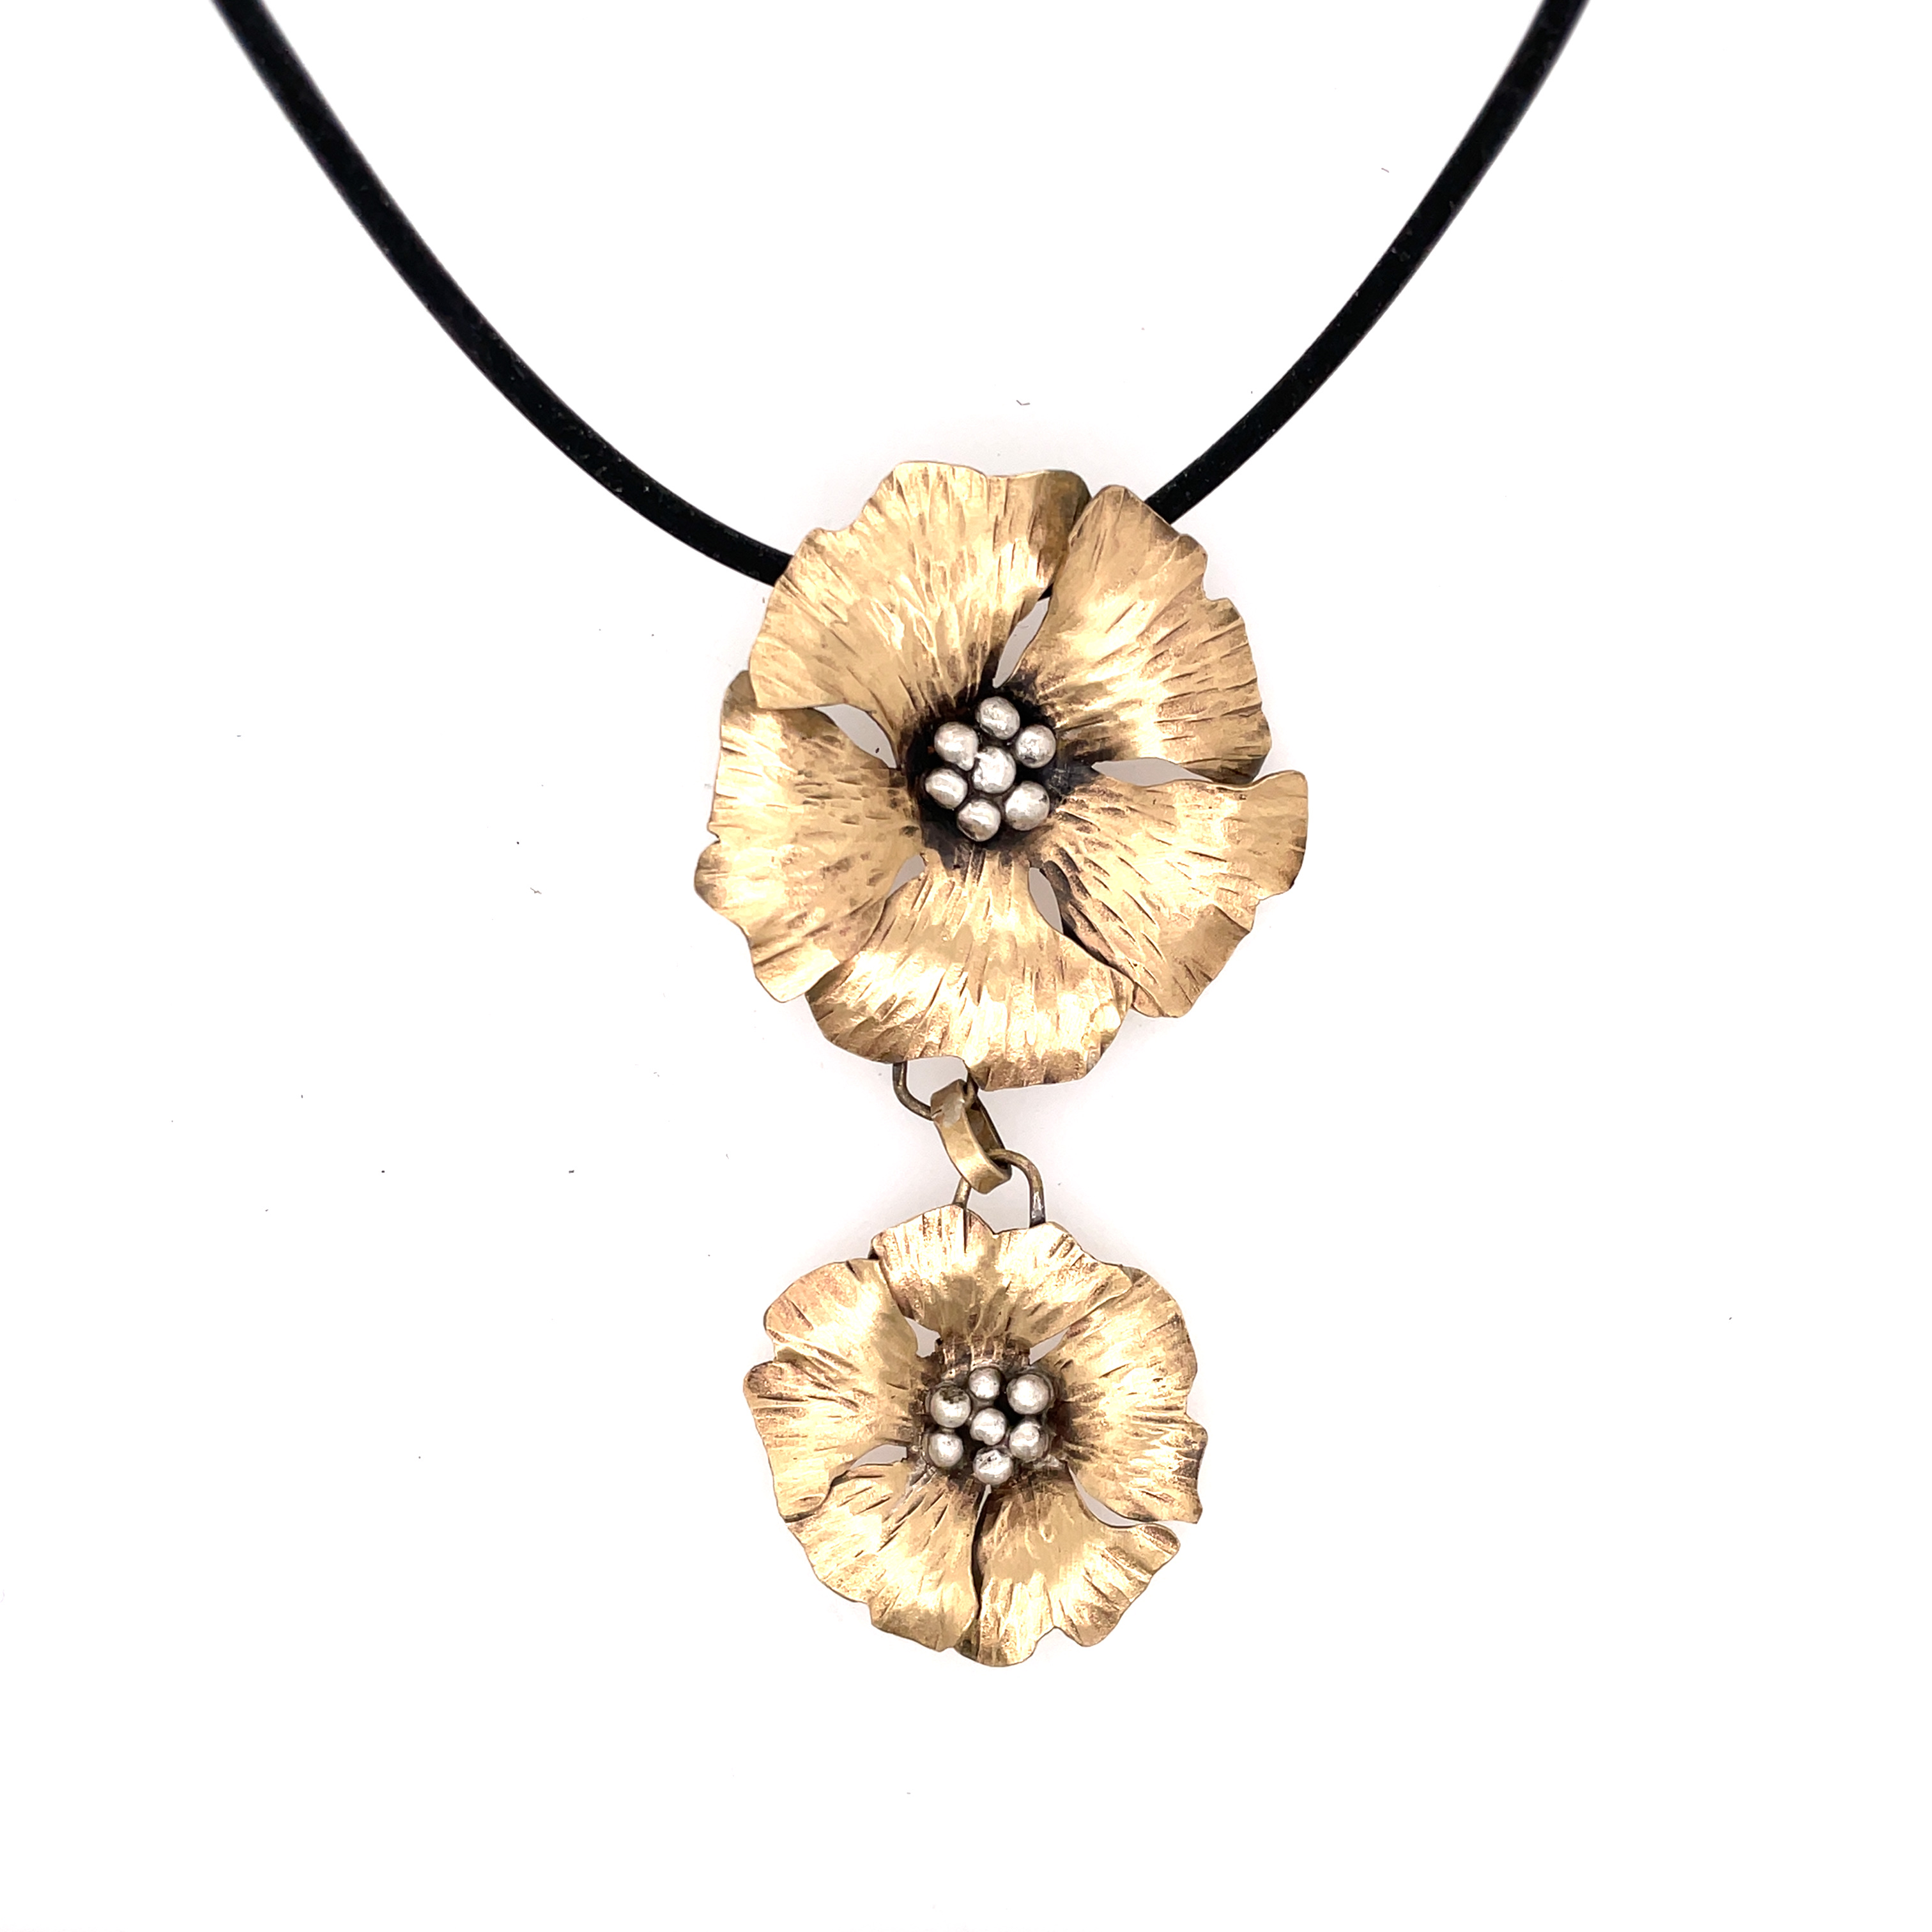 Large and Small Poppy Pendant - Brass and Silver on Rubber Neck